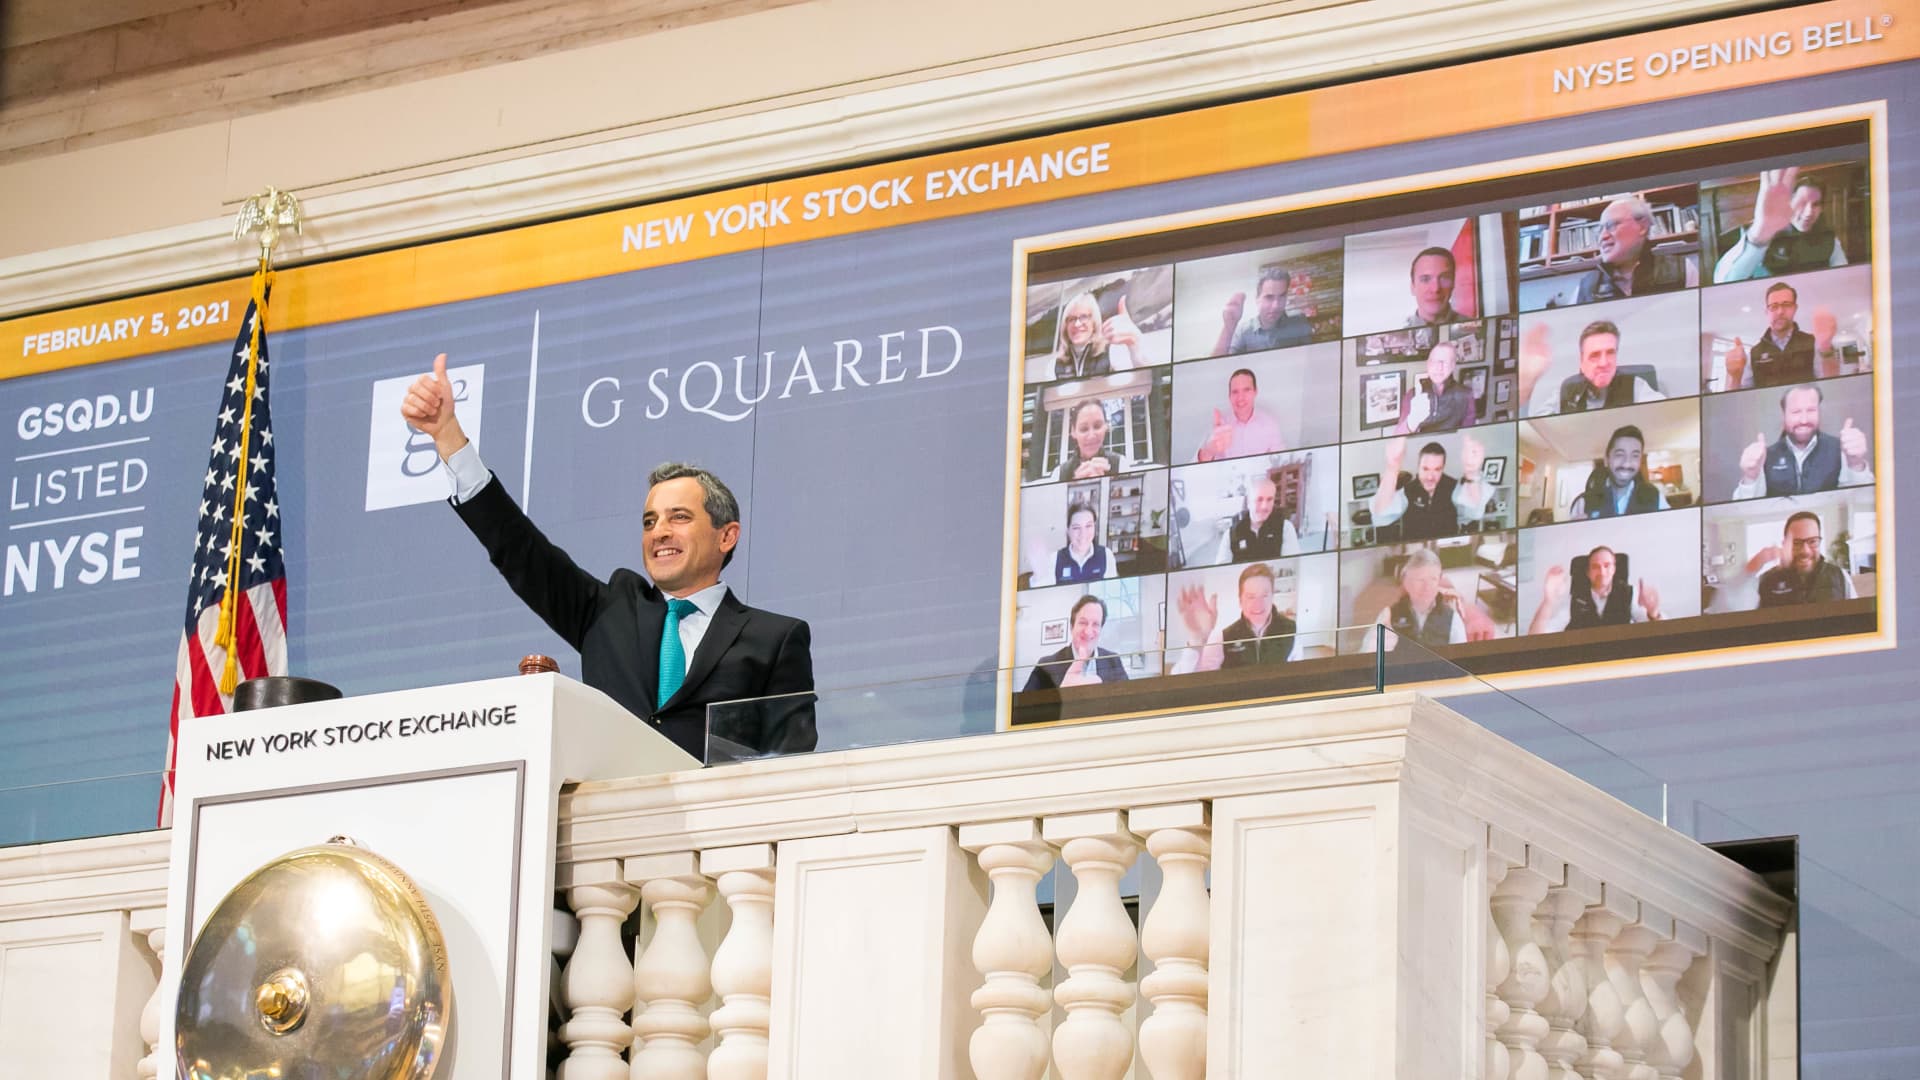 G Squared Ascend I Inc. SPAC IPO at the New York Stock Exchange on Feb. 5th, 2021.